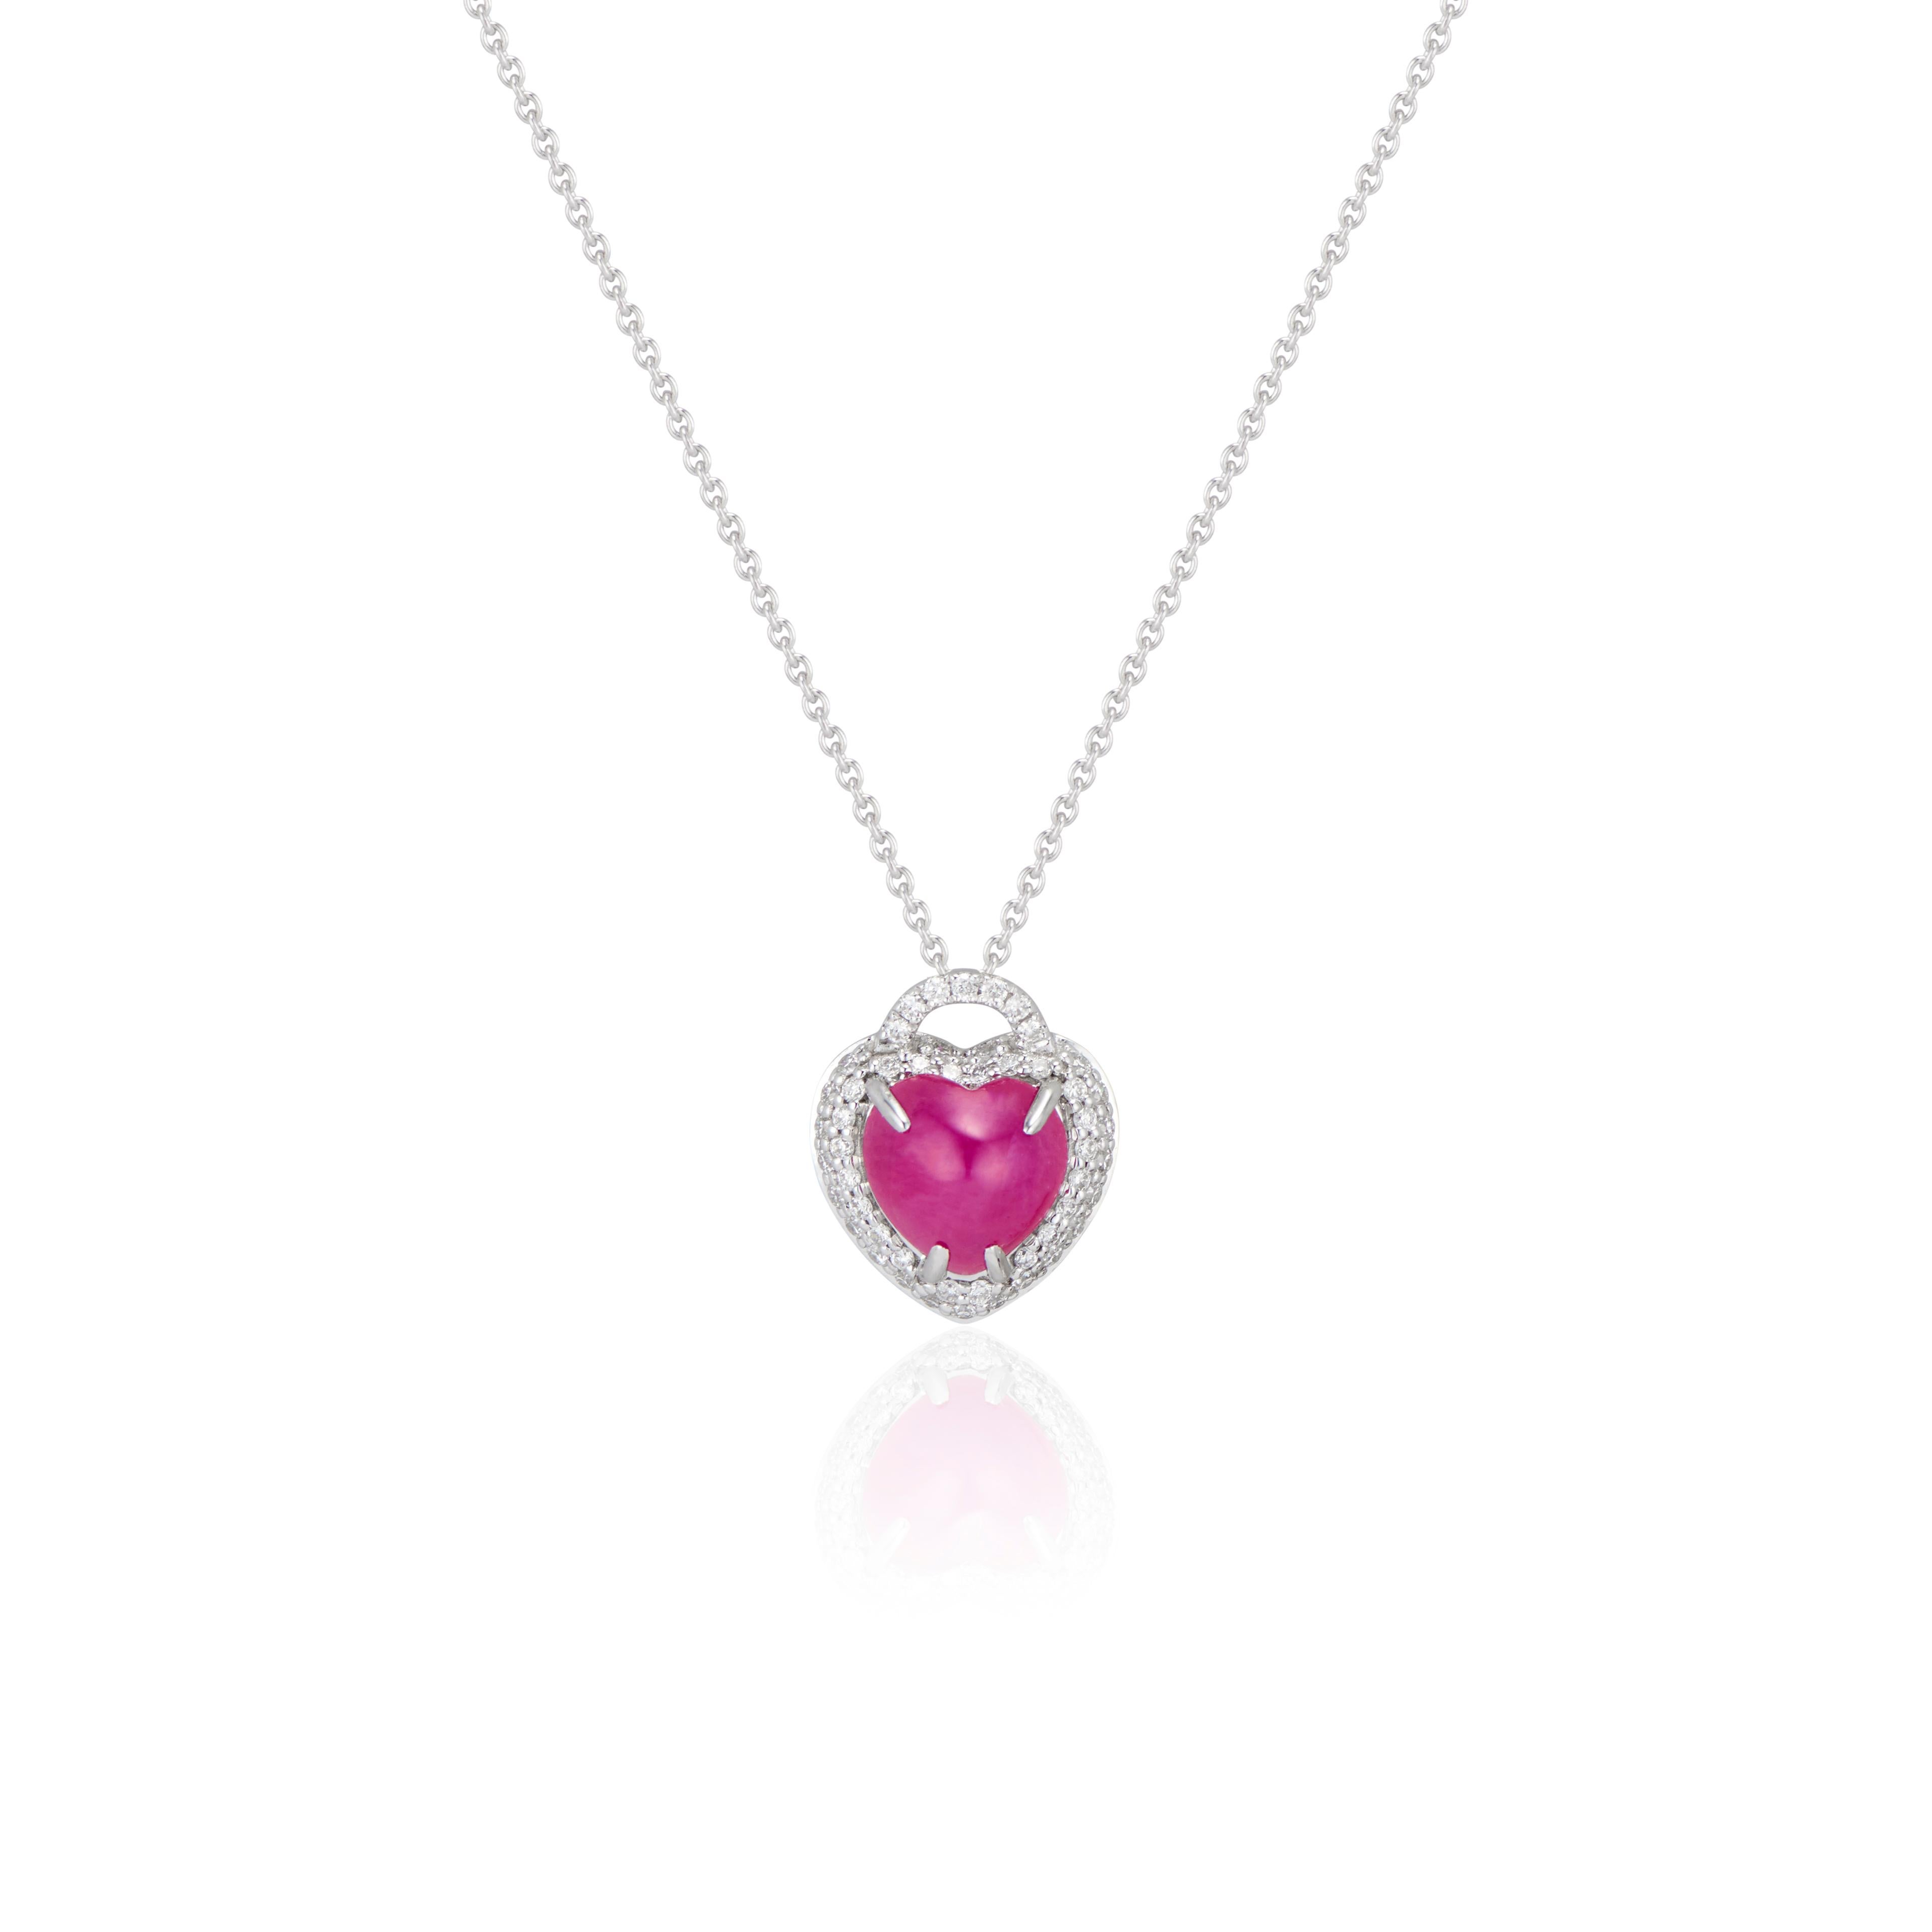 Big Heart Sapphire Cabochon and diamond locket style pendant necklace includes a Sapphire Cabochon of 2.35 ctw and pave set diamonds of 0.28 ctw, set in 18k white gold.